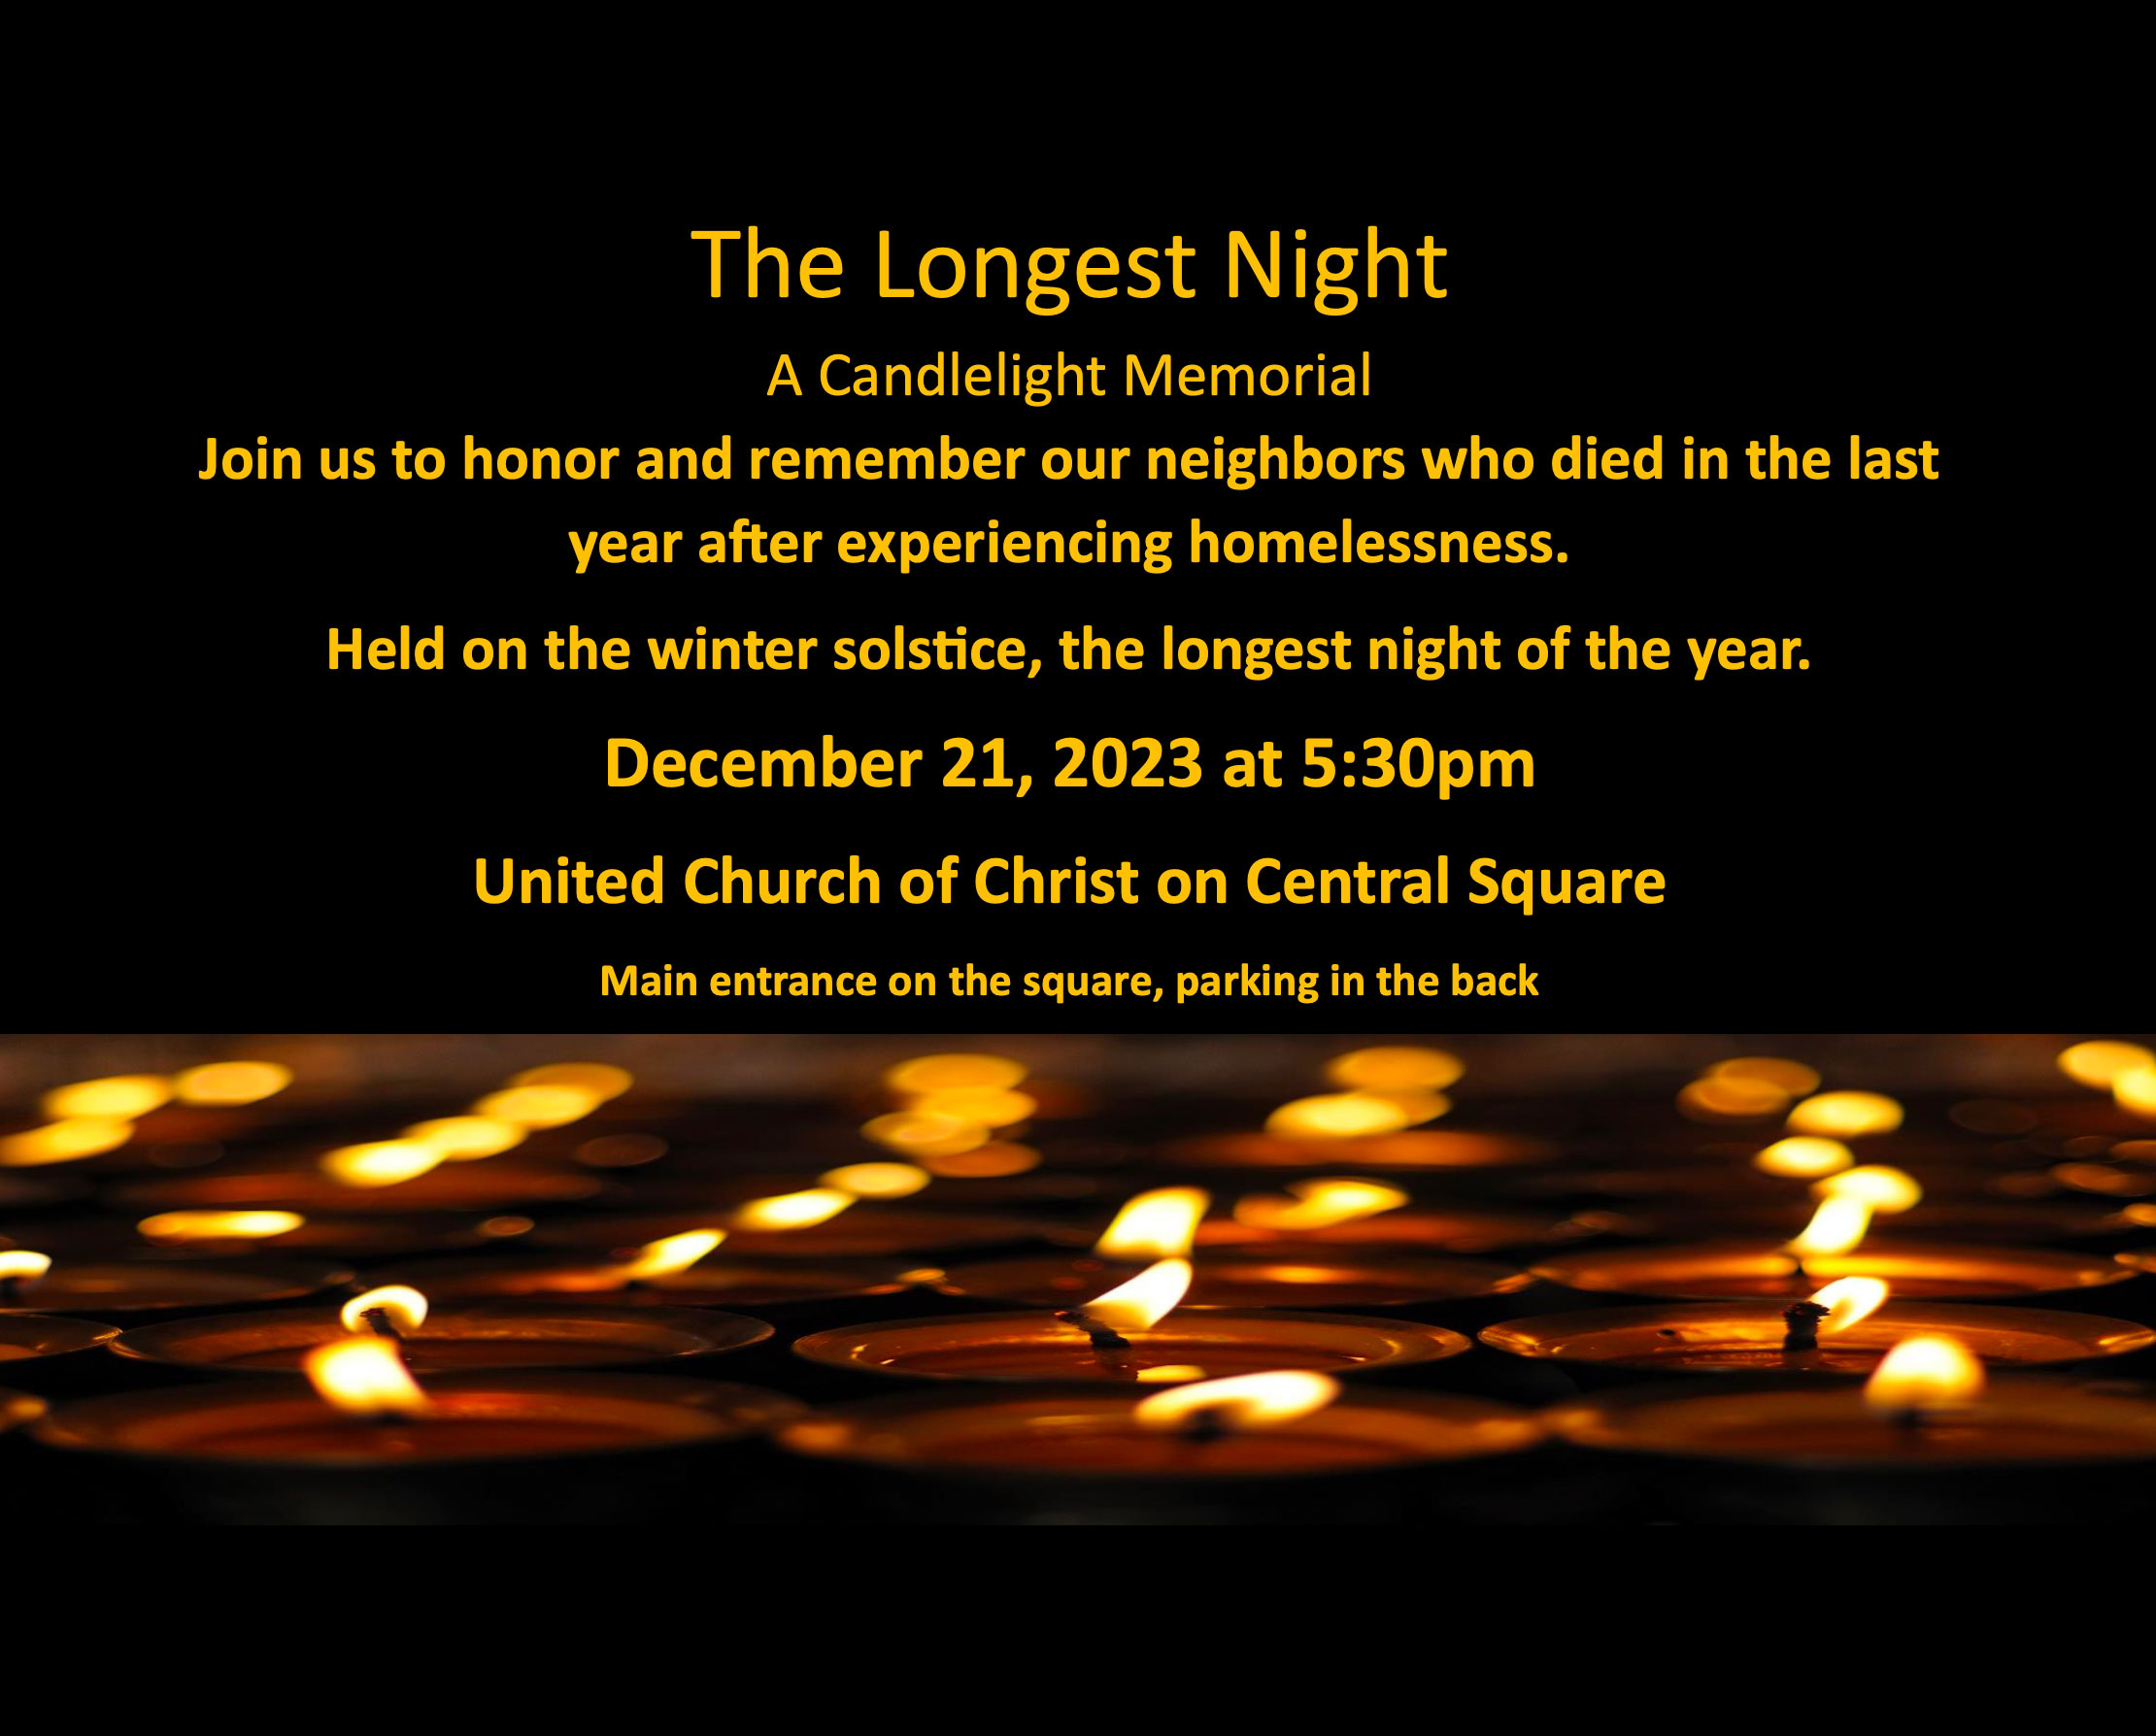 The Longest Night Candlelight Memorial